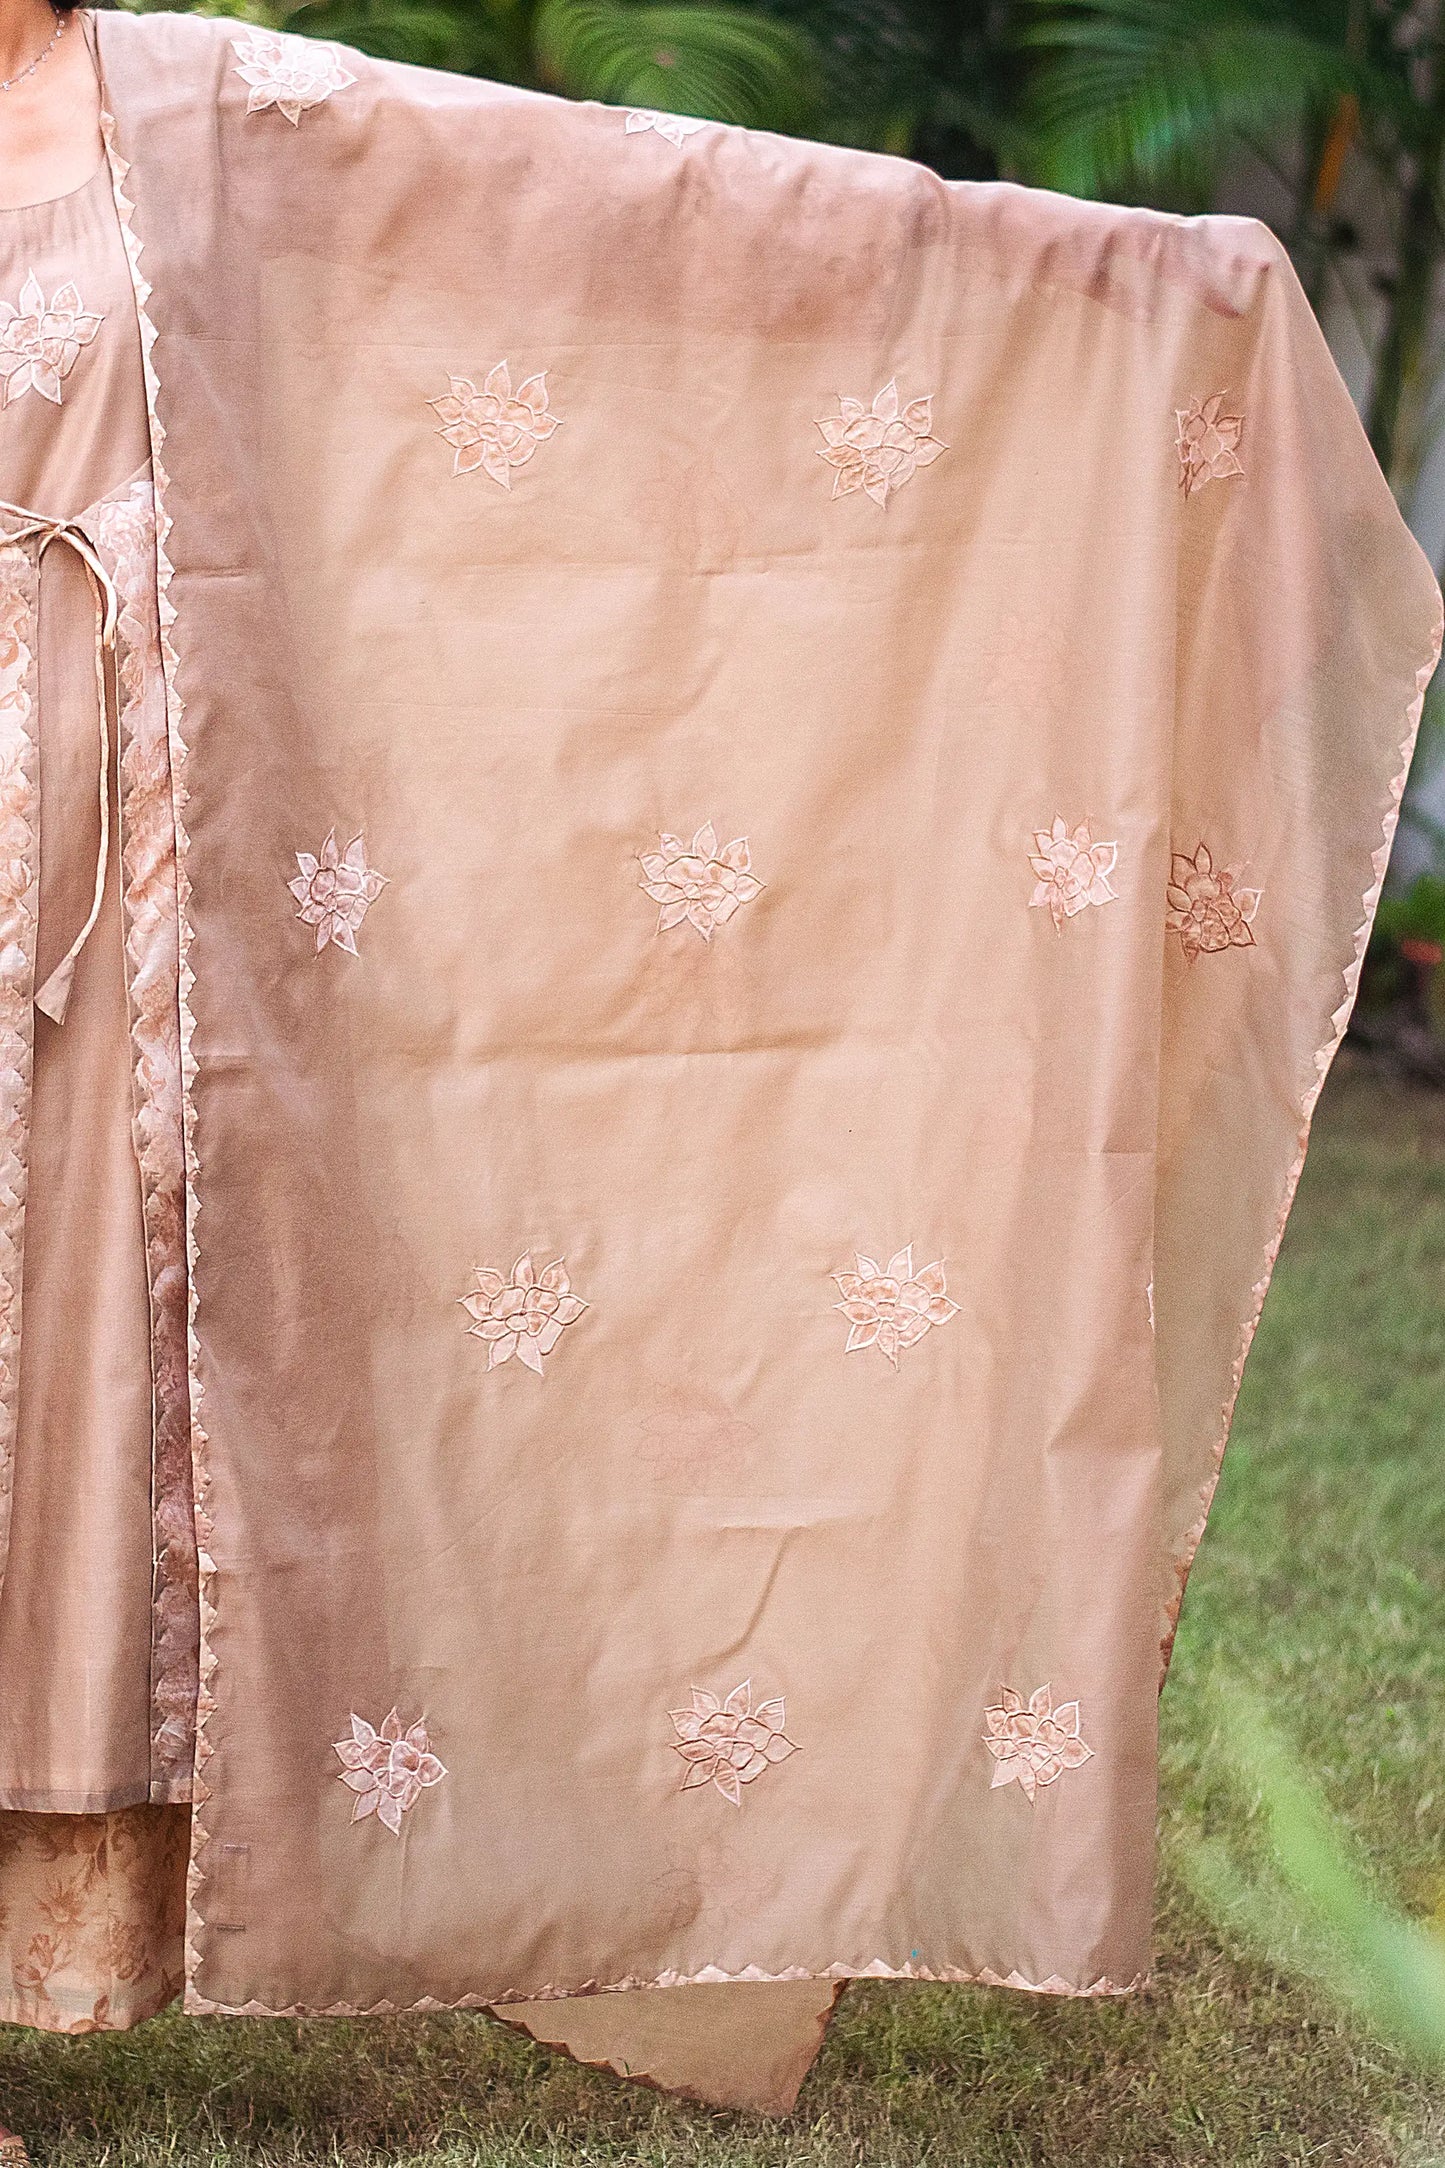 Detail of the beige chanderi dupatta adorned with beige patchwork flowers and kikri work, as styled by the model